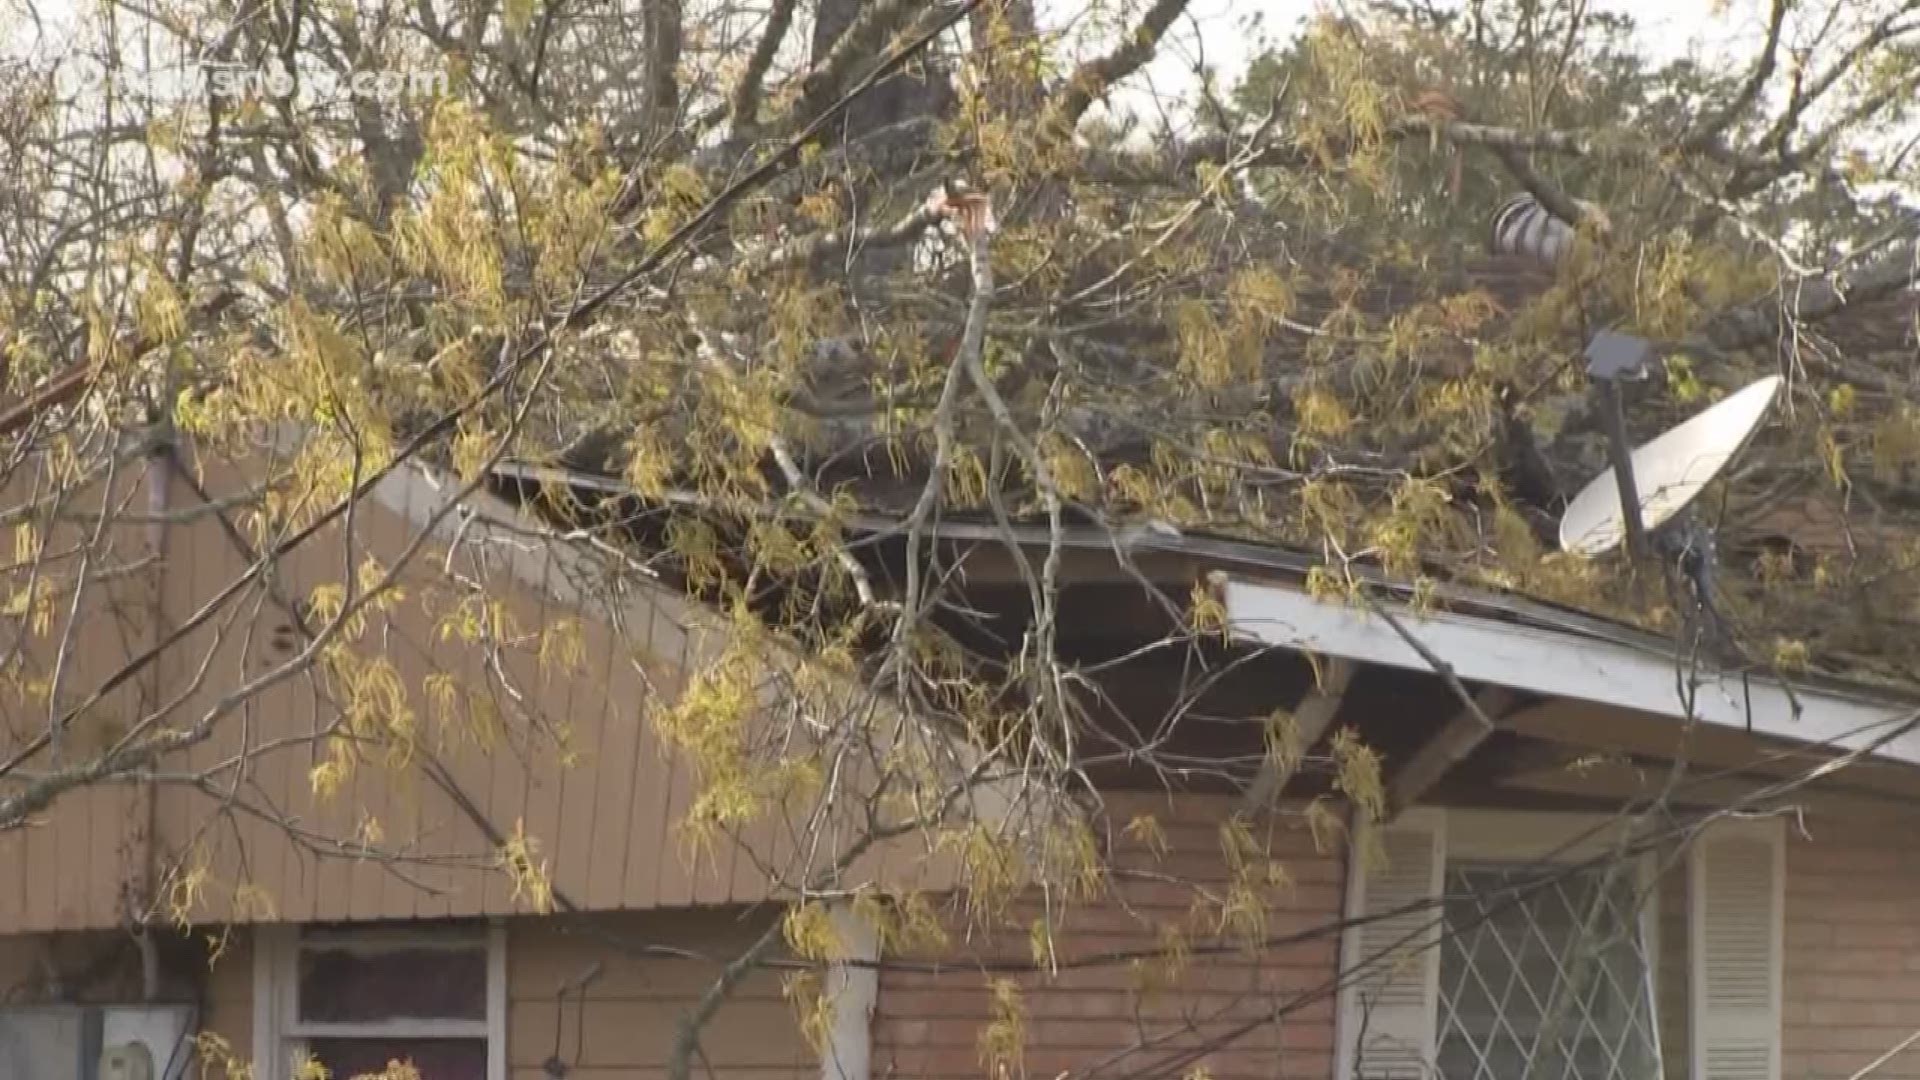 The family heard a "boom" when the tree fell on the house.